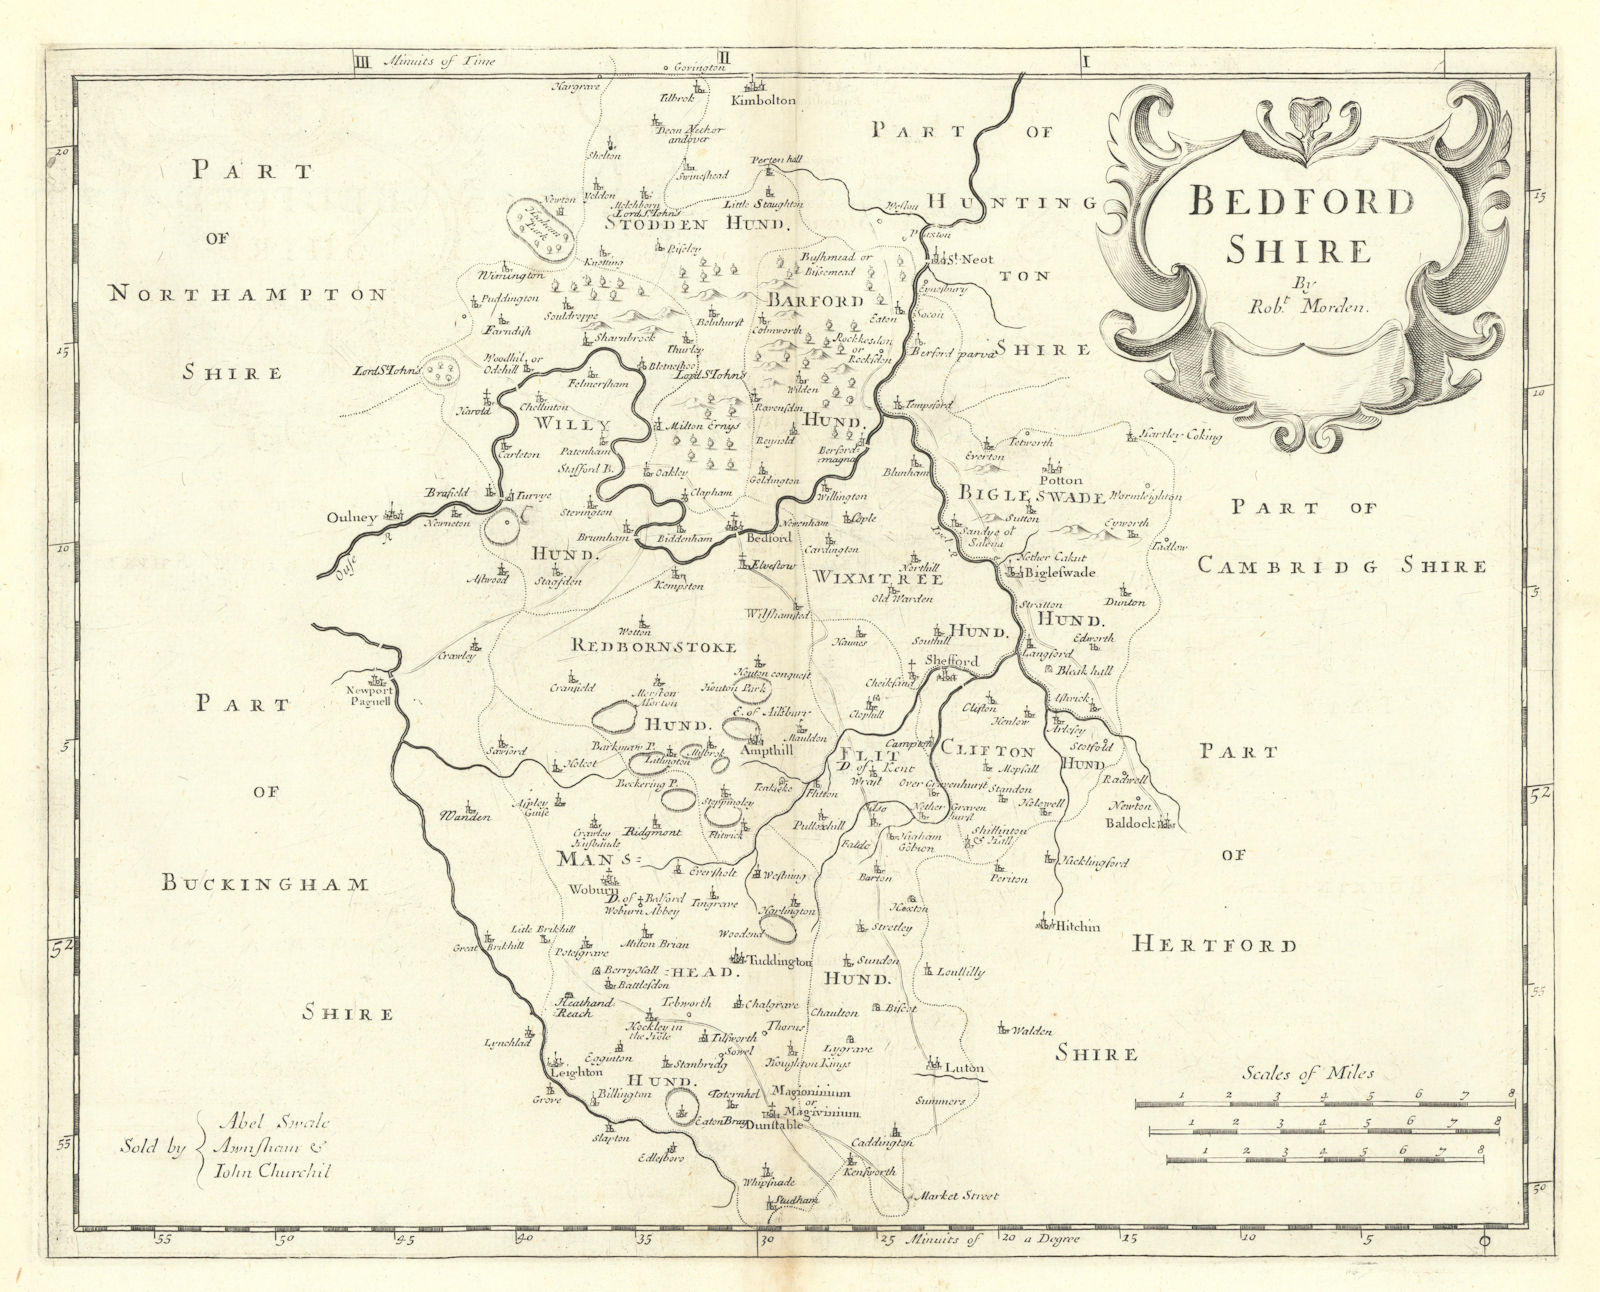 Bedfordshire. 'BEDFORD SHIRE' by ROBERT MORDEN from Camden's Britannia 1722 map